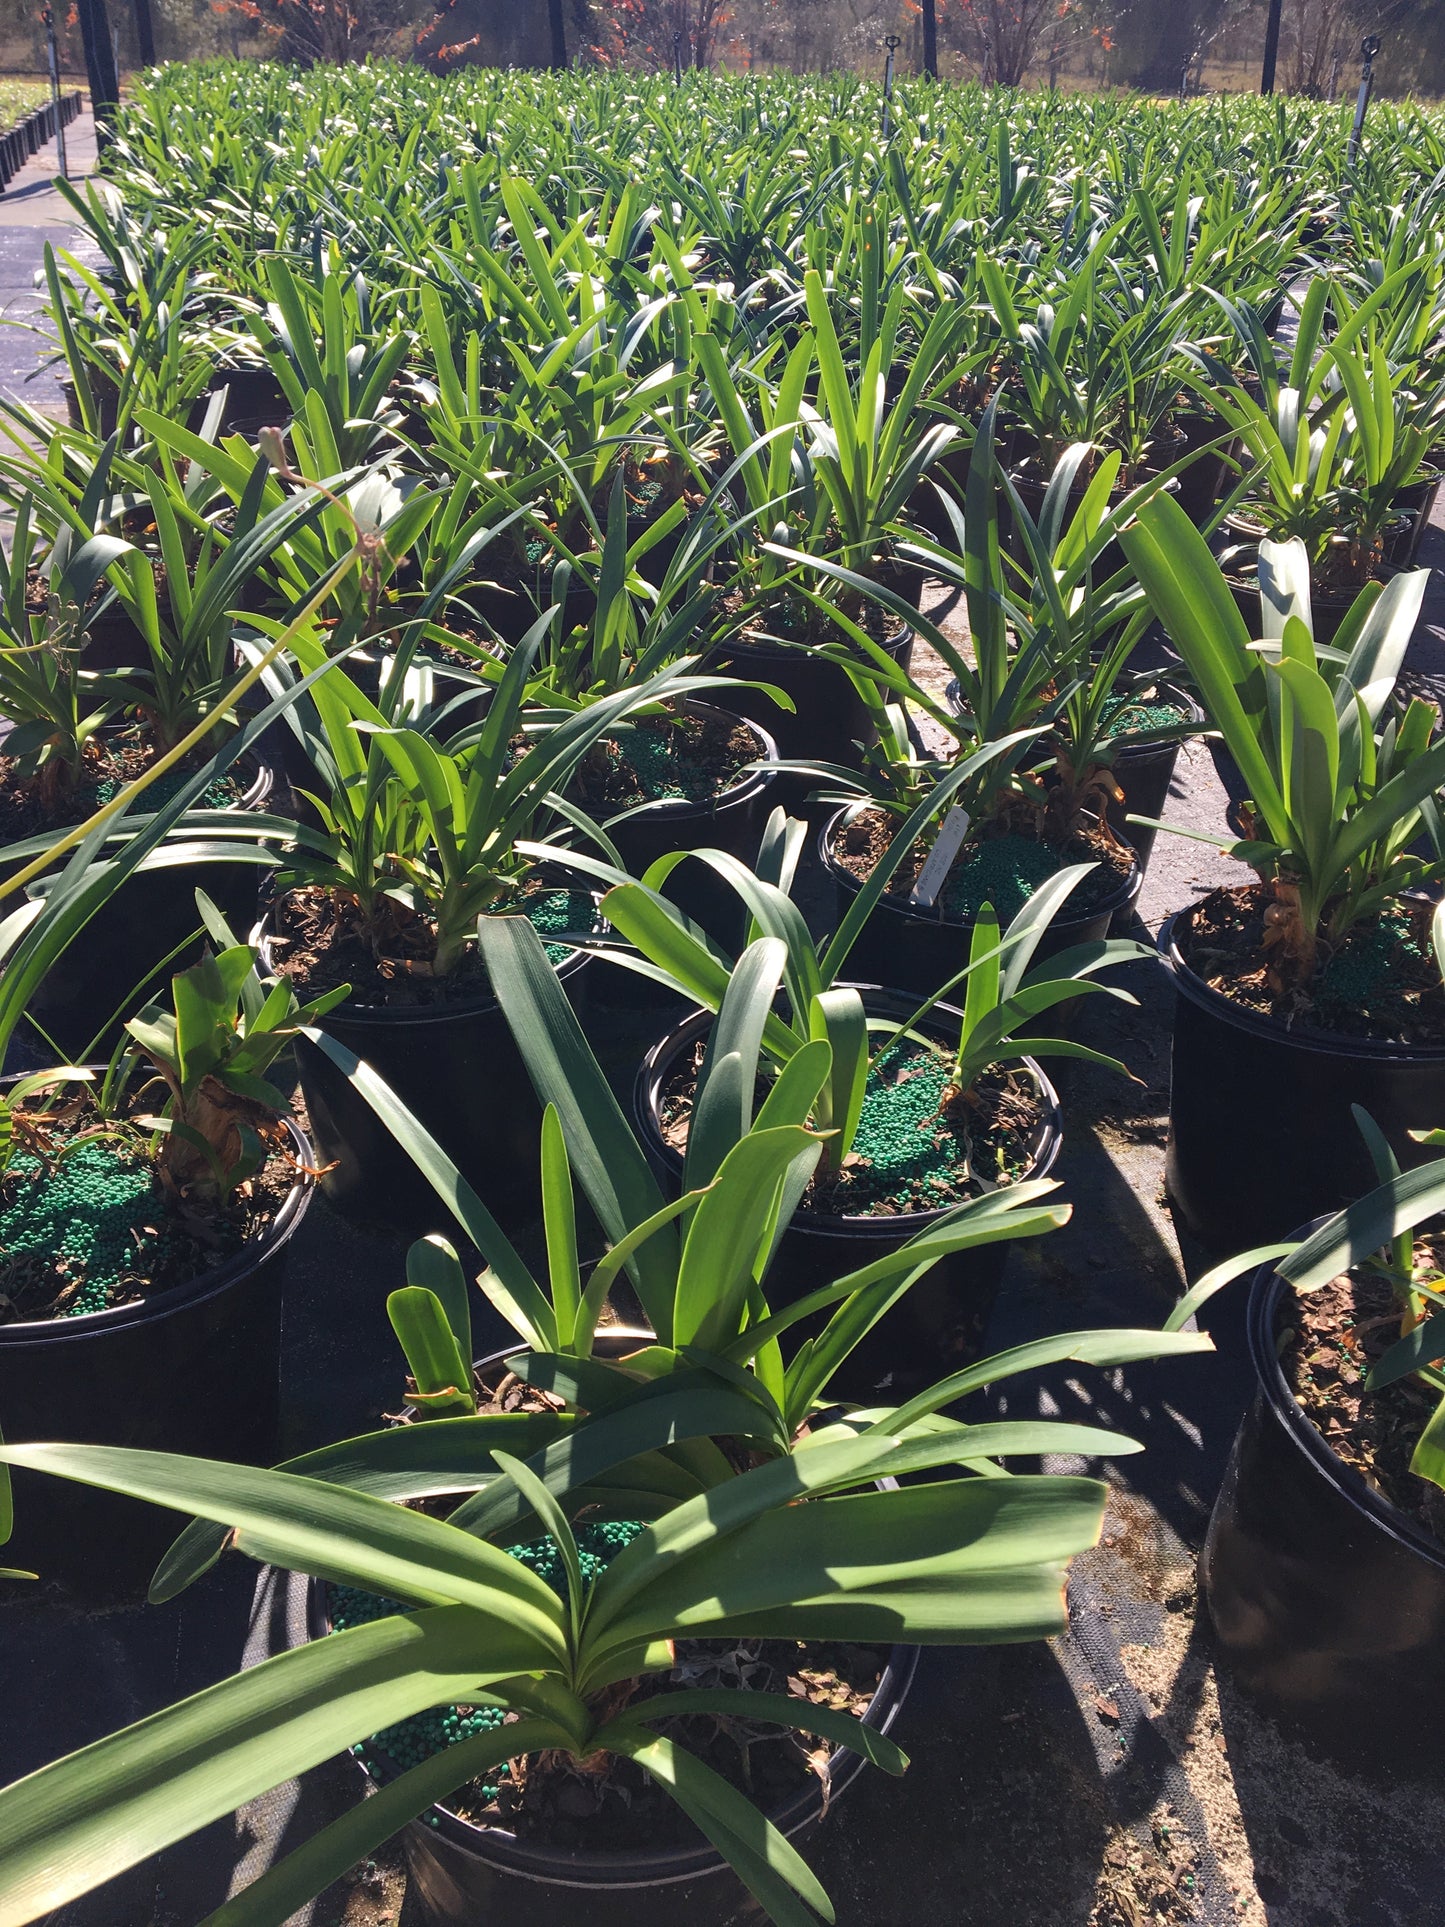 Agapanthus Blue Lily Of The Nile African Shrub (Blue Flowers) in a 10 in. (3 Gal.) Grower Pot